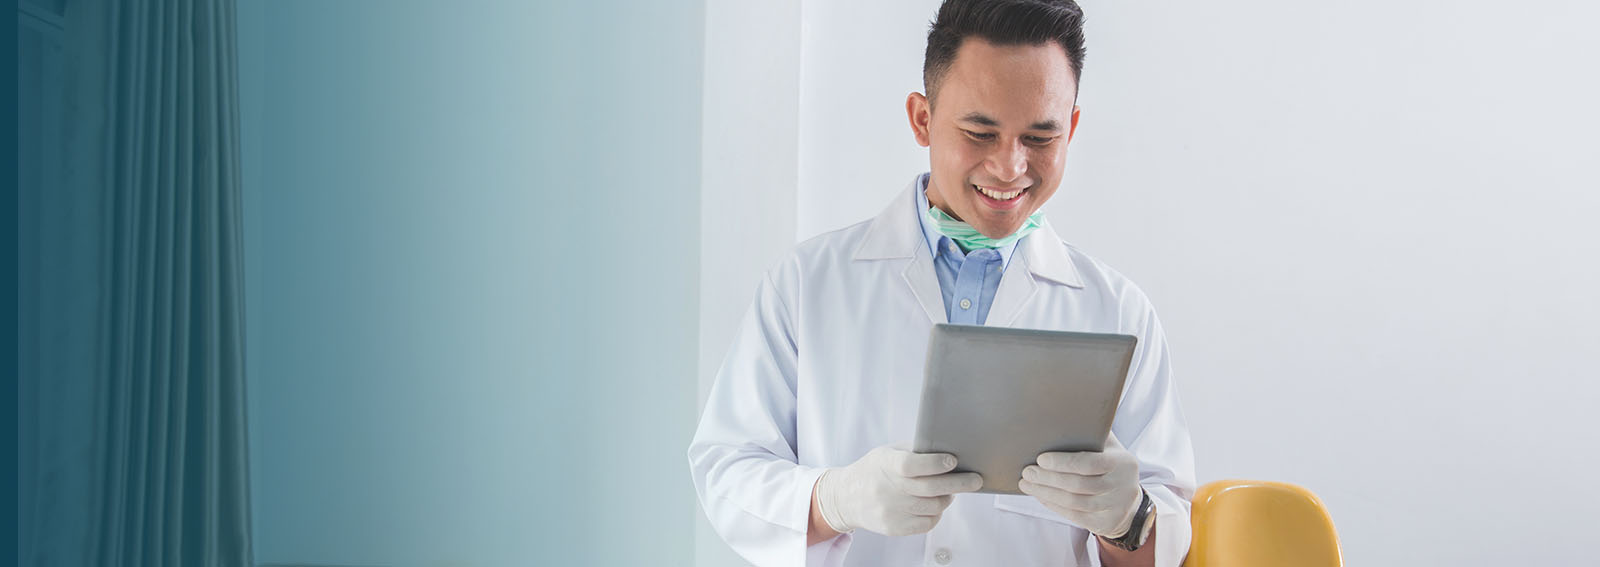 dentist in an office working on a tablet